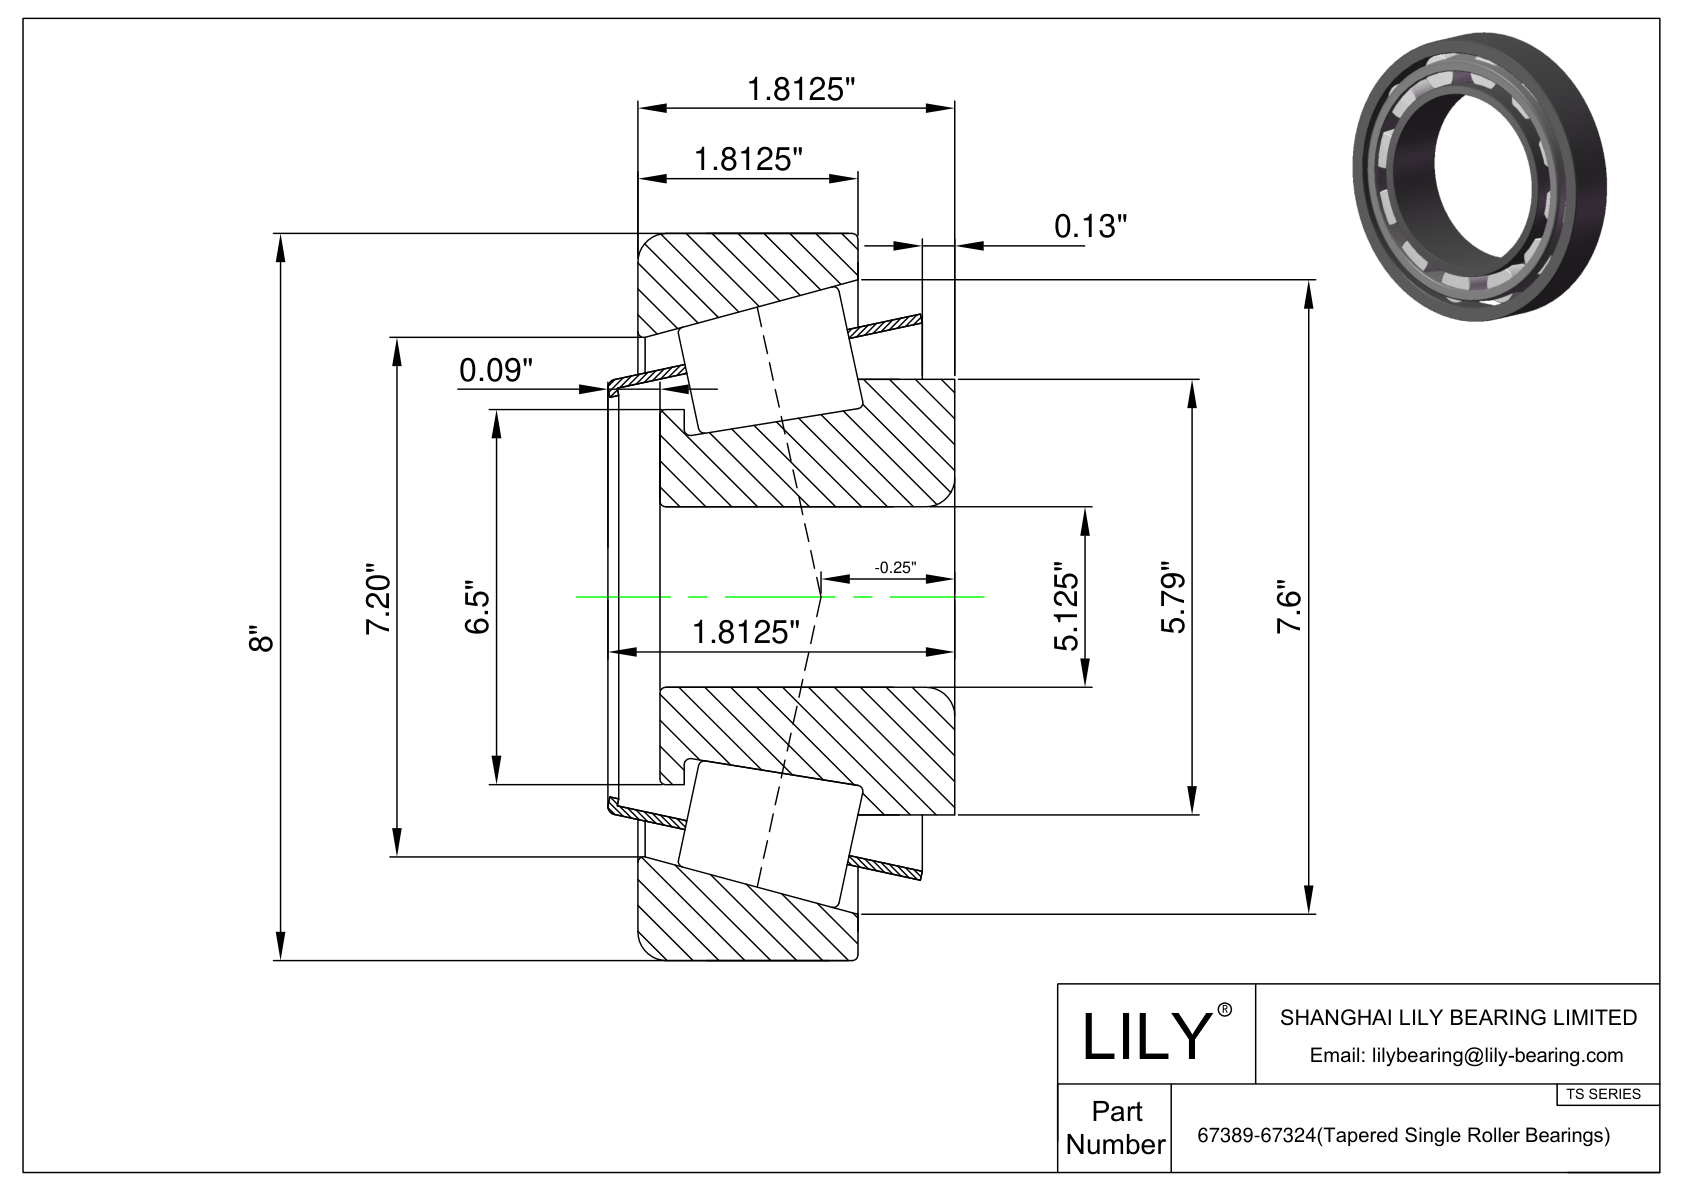 67389-67324 TS (Tapered Single Roller Bearings) (Imperial) cad drawing